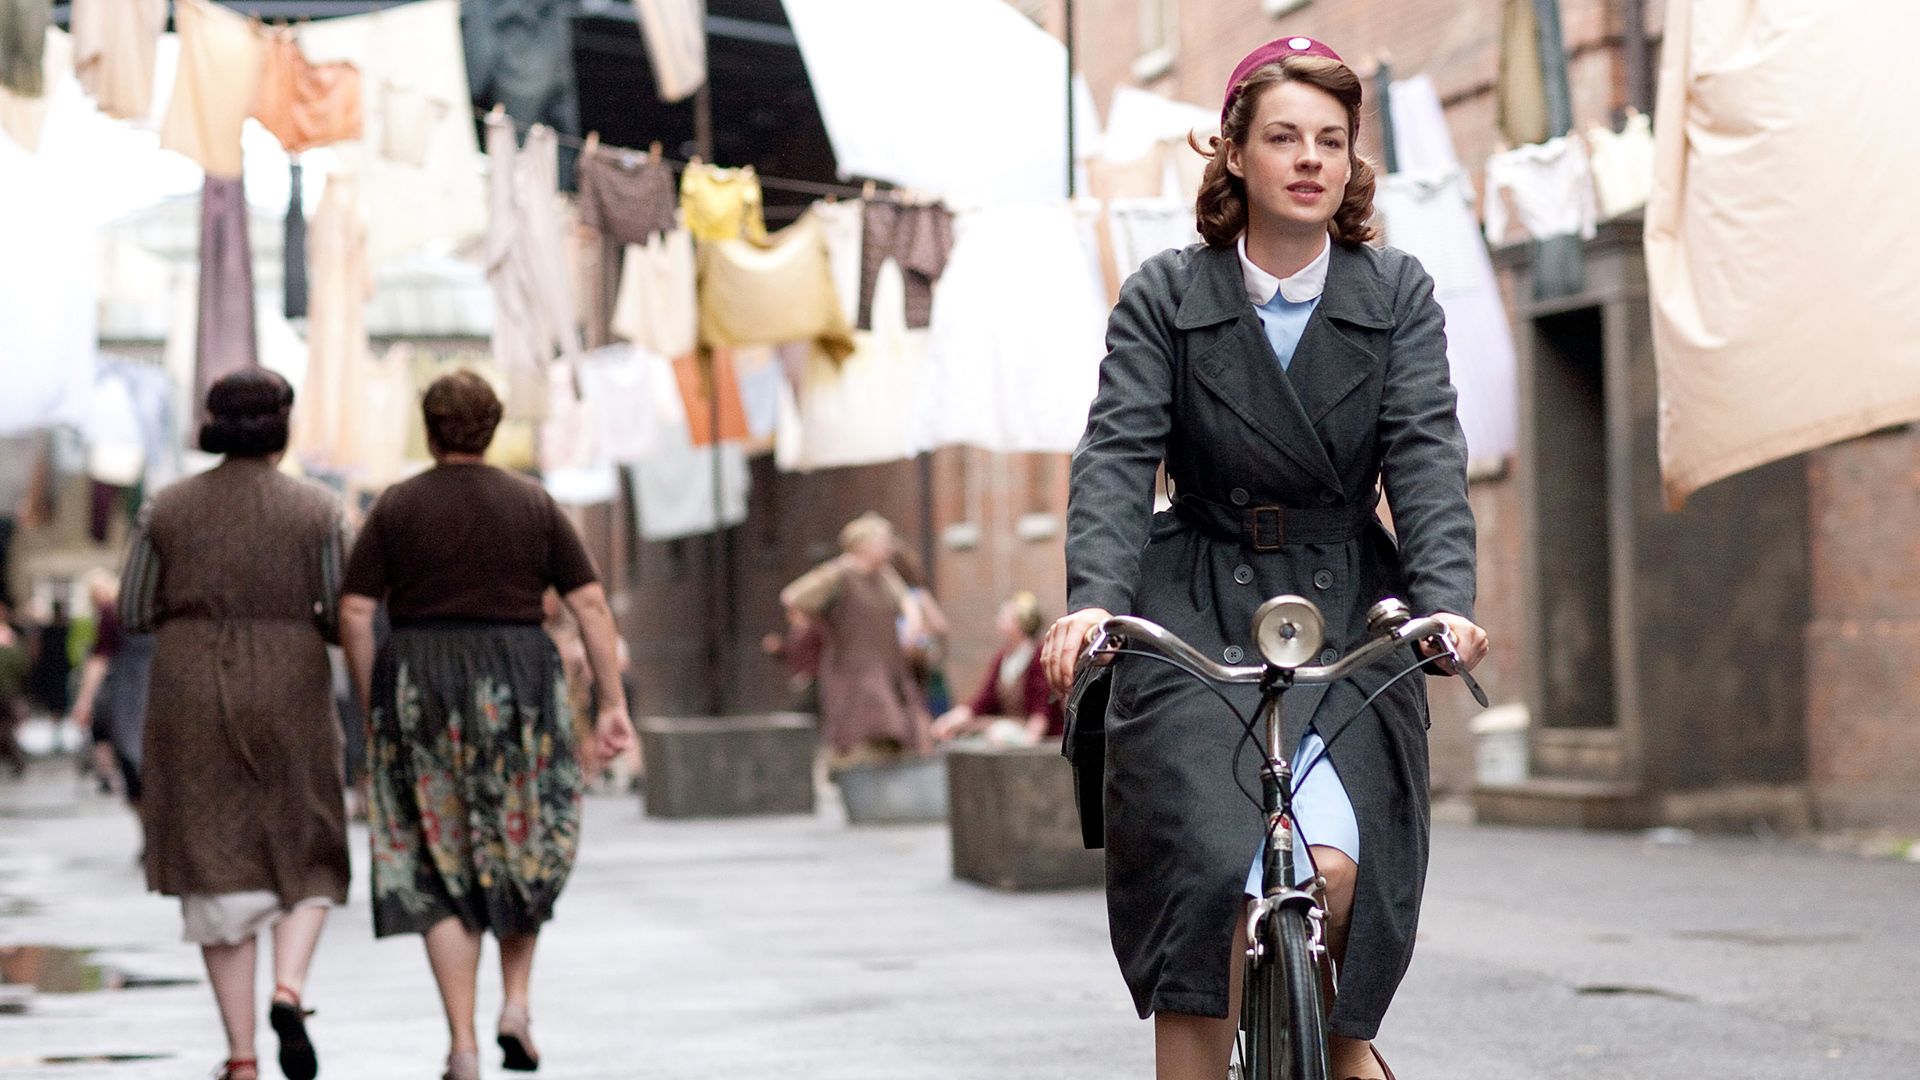 Call the Midwife background